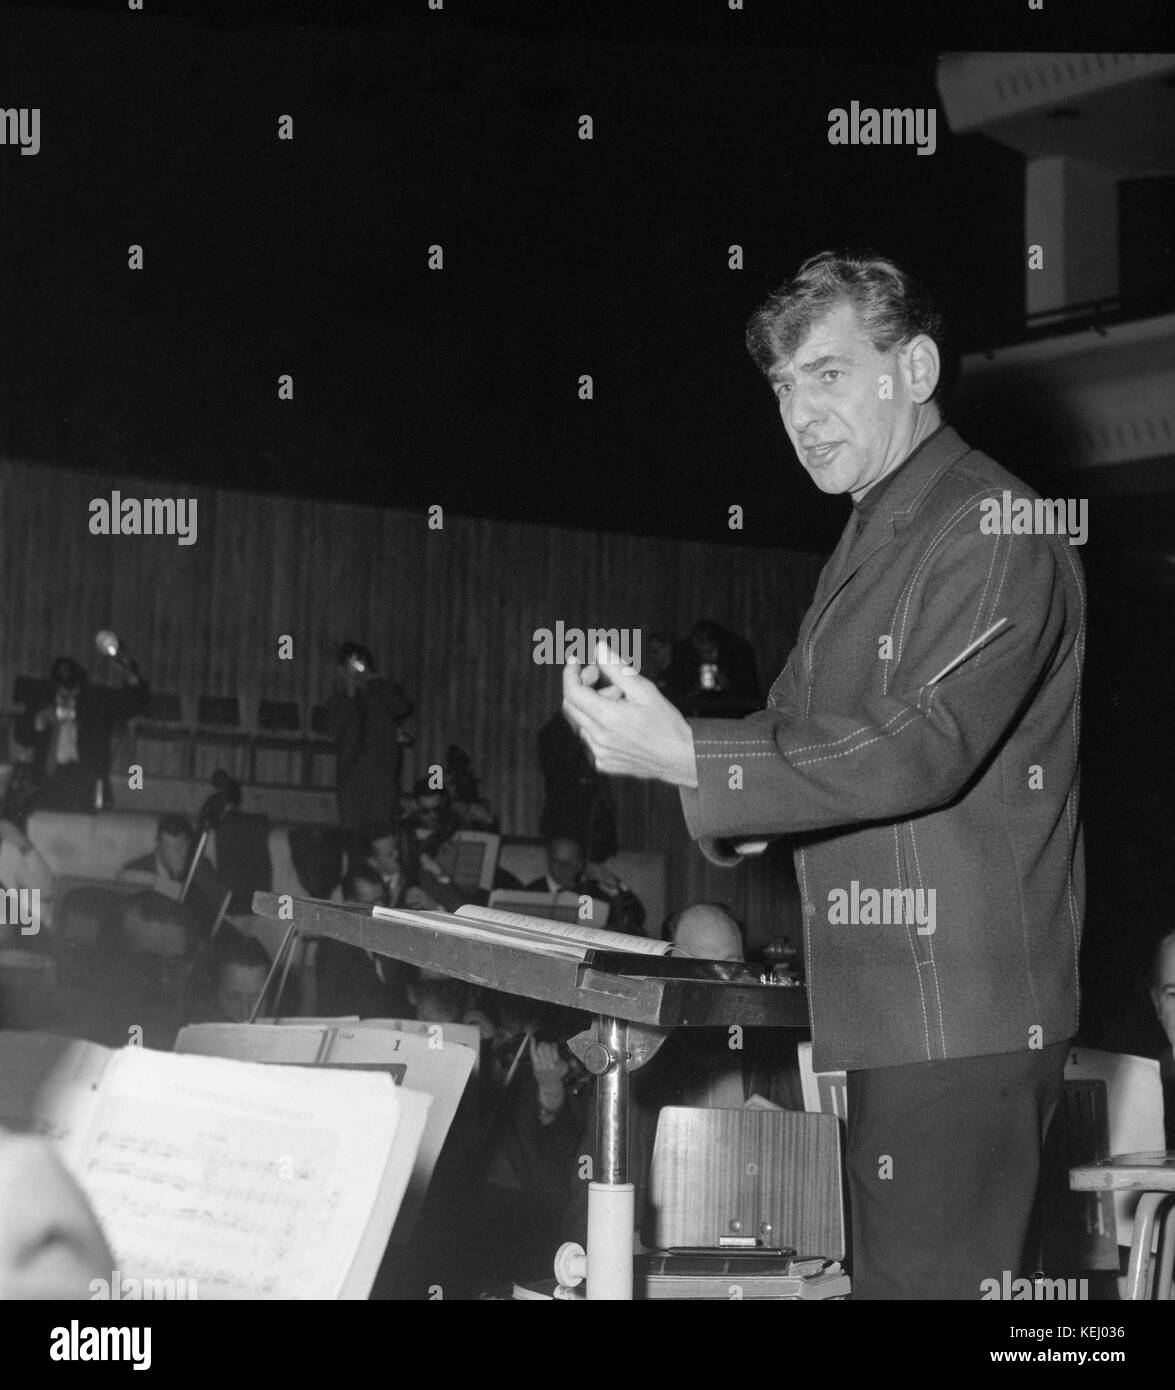 Conductor Leonard Bernstein in rehearsals with the New York Philharmonic Orchestra on 13th February 1963. Leonard Bernstein (August 25, 1918 – October 14, 1990) was an American composer, conductor, author, music lecturer, and pianist. He was among the first conductors born and educated in the US to receive worldwide acclaim. According to music critic Donal Henahan, he was 'one of the most prodigiously talented and successful musicians in American history. Stock Photo